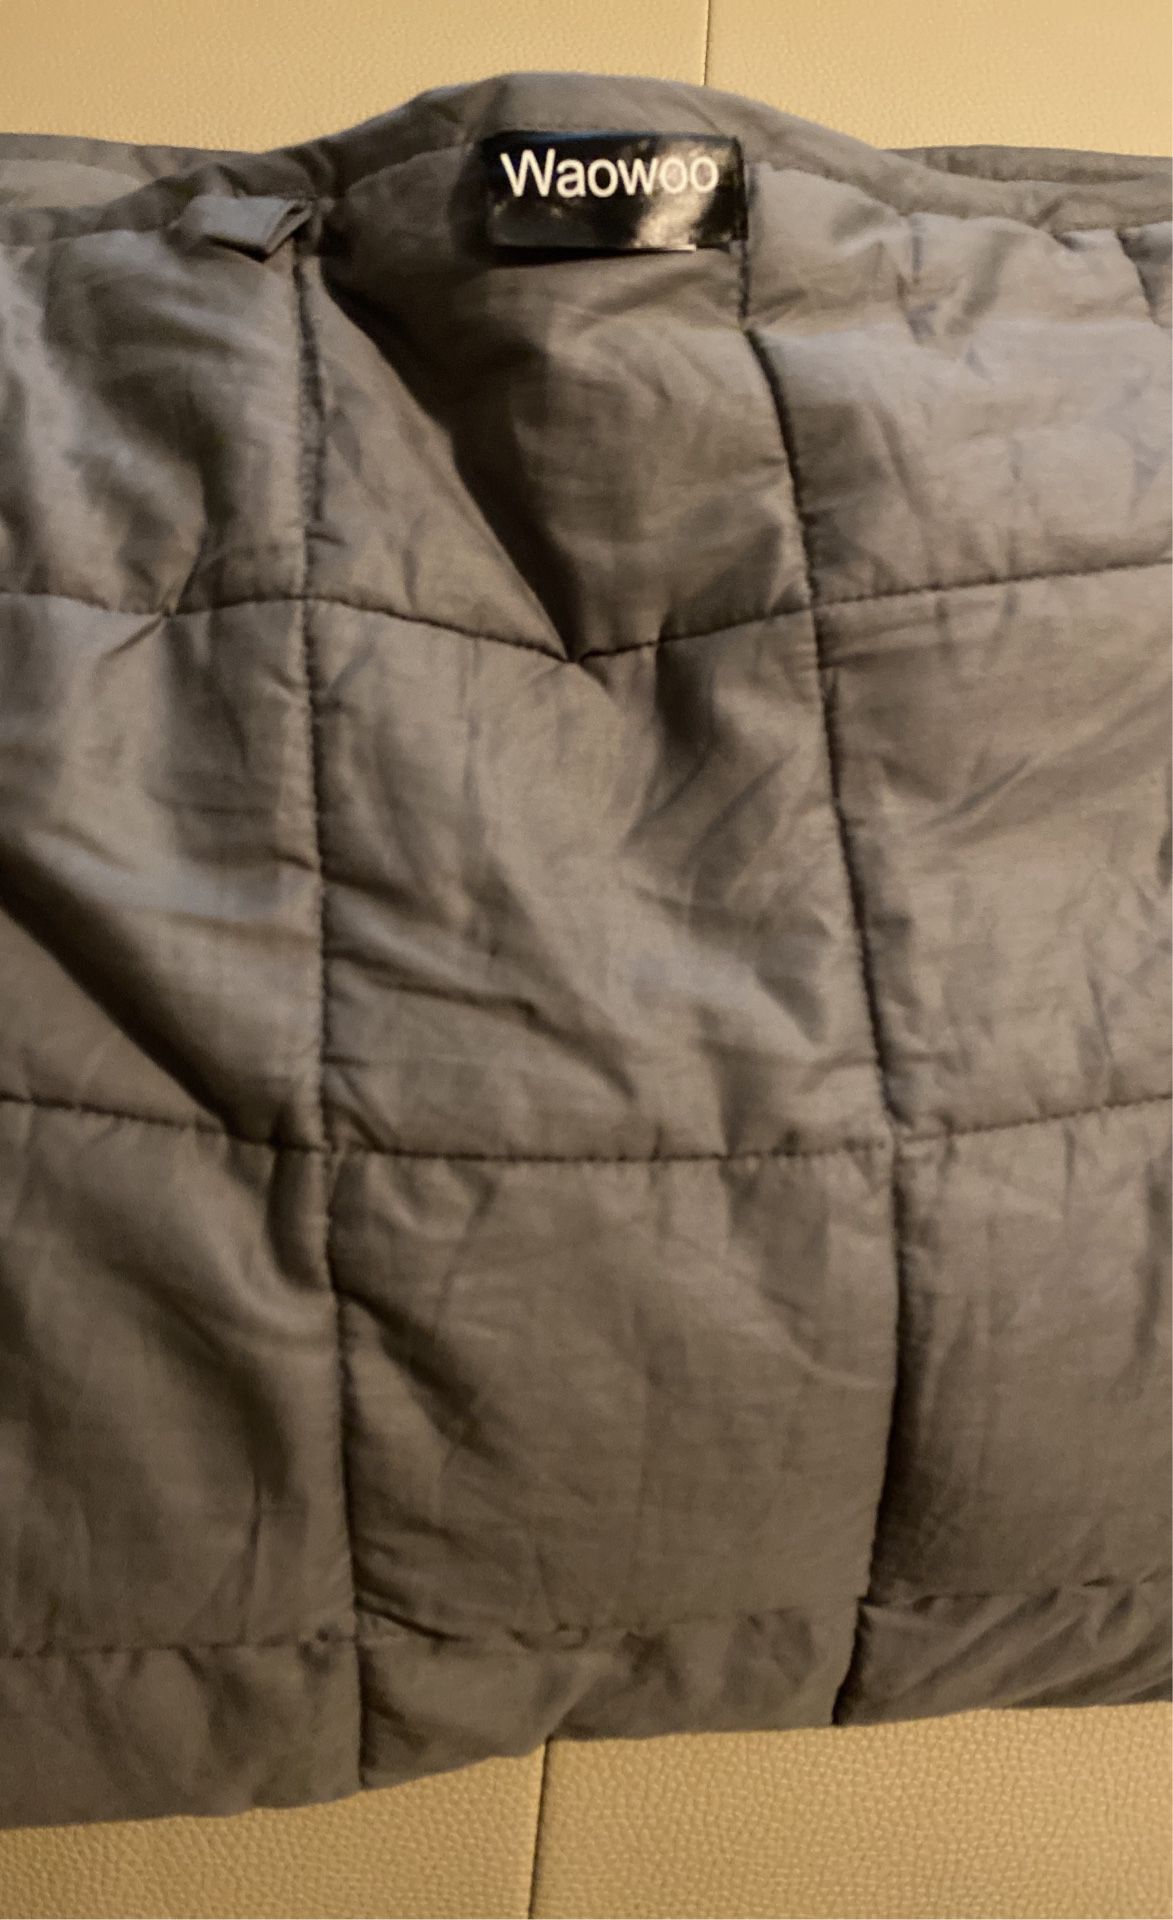 Waowoo 25lb Weighted Blanket 